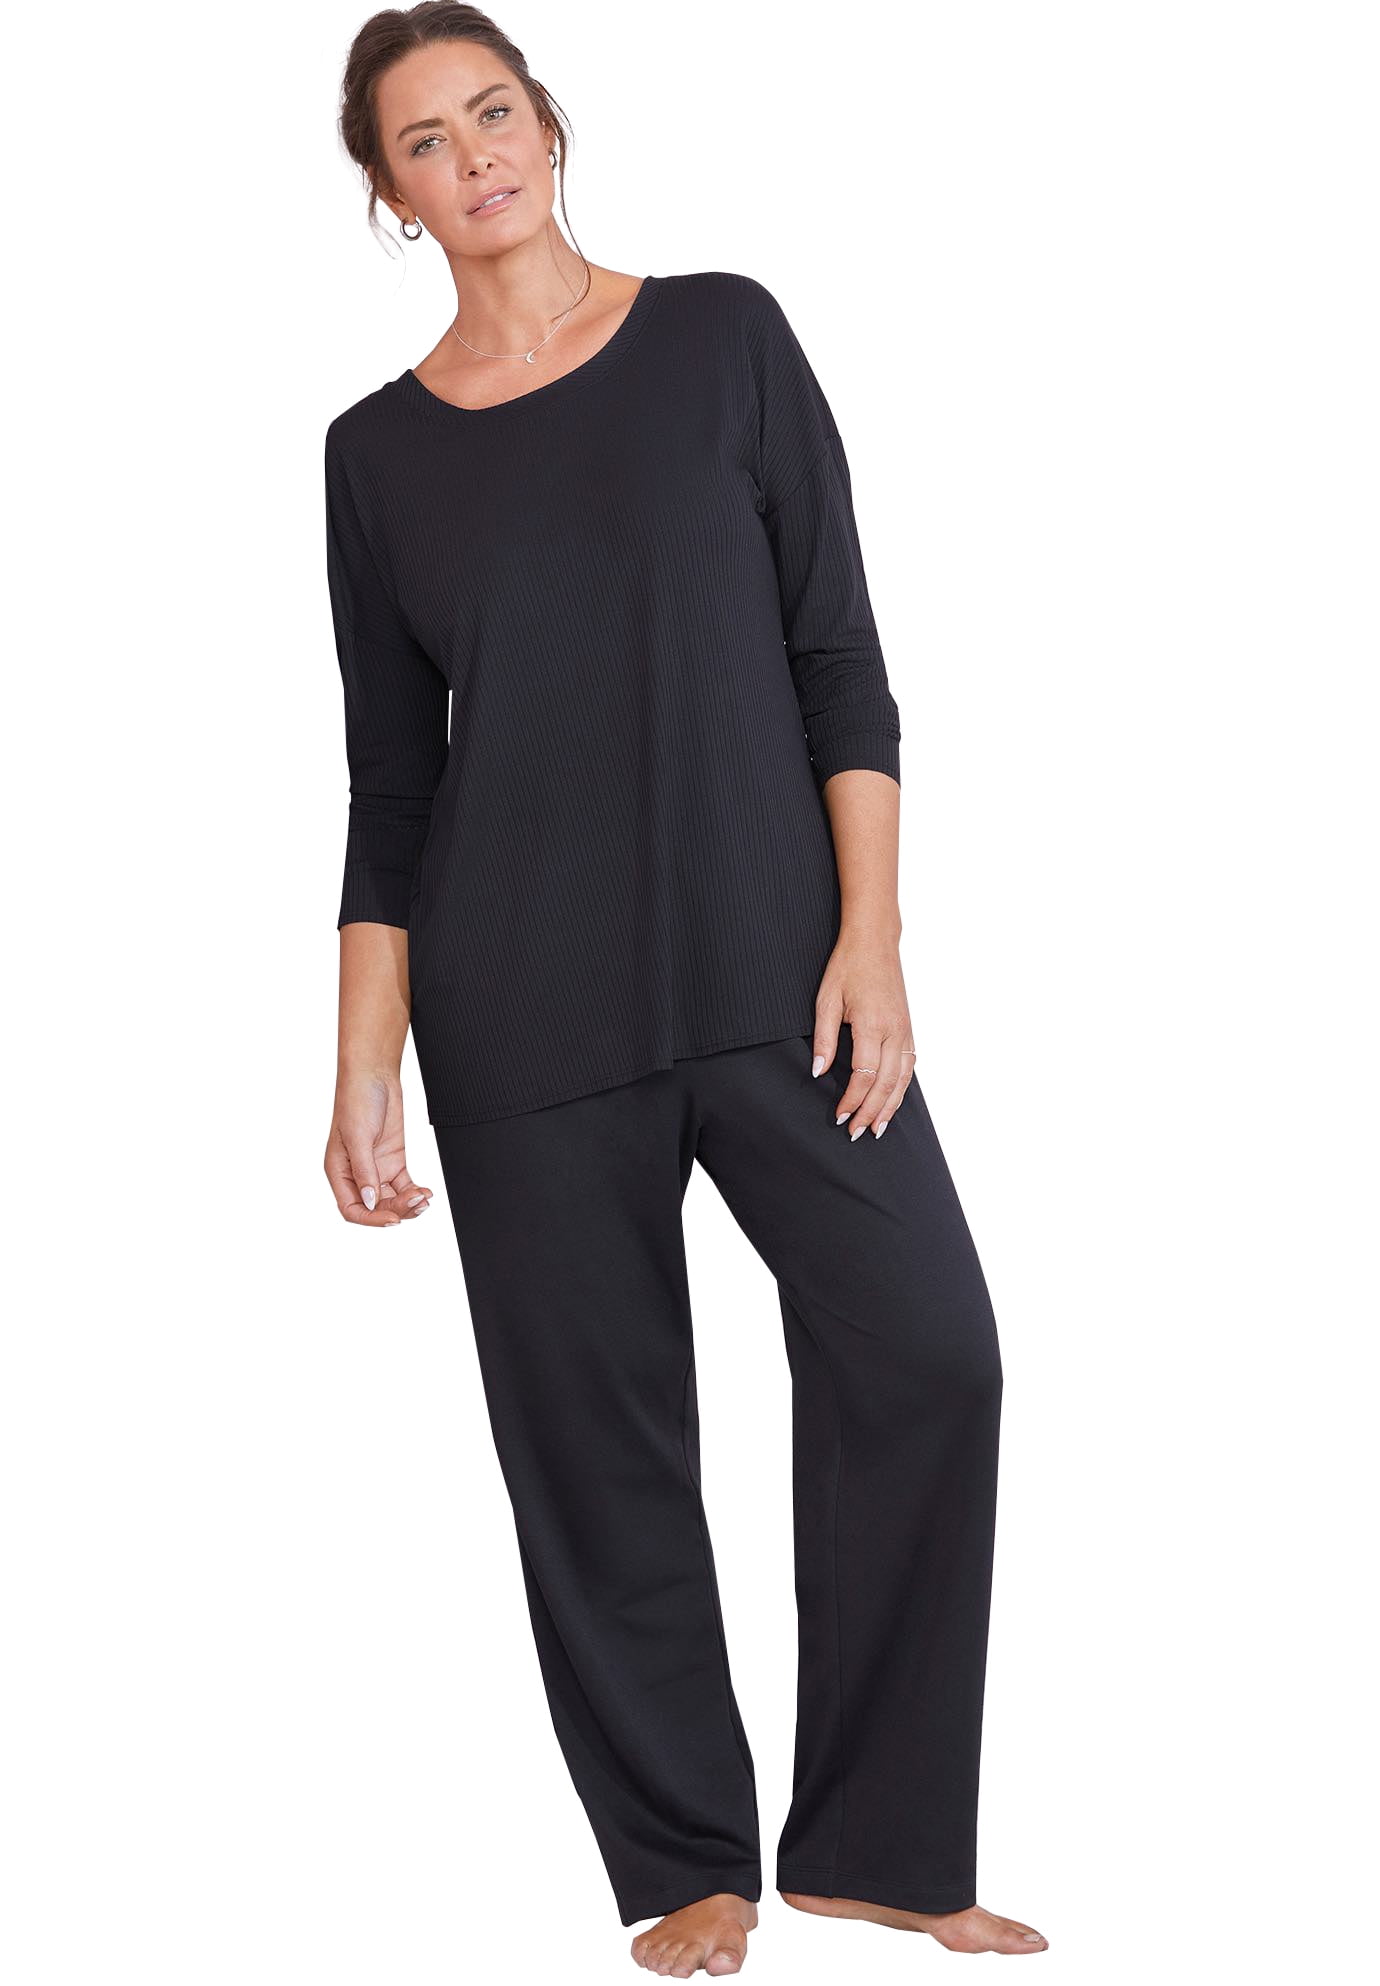 Duplikering digital Trickle Swimsuits for All Women's Plus Size Zoey Ribbed Long Sleeve Shirt - 22/24,  Black - Walmart.com